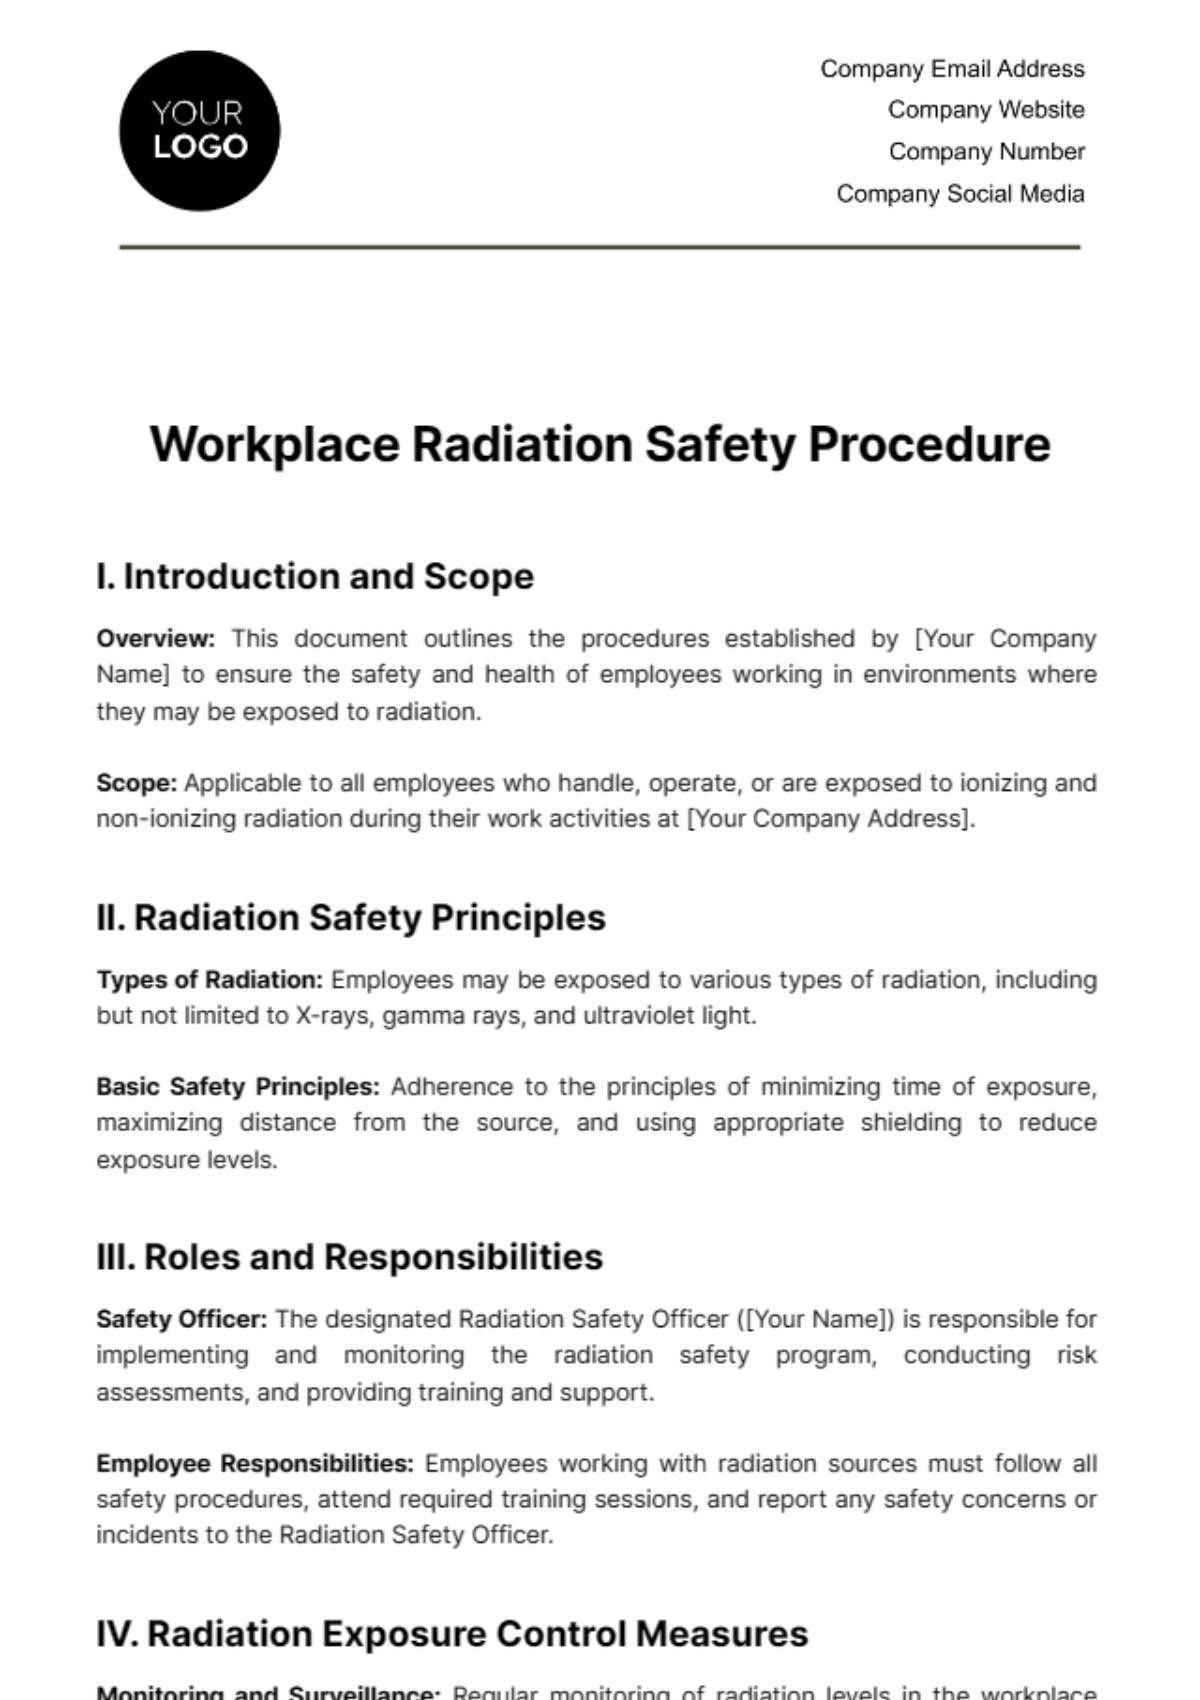 Workplace Radiation Safety Procedure Template